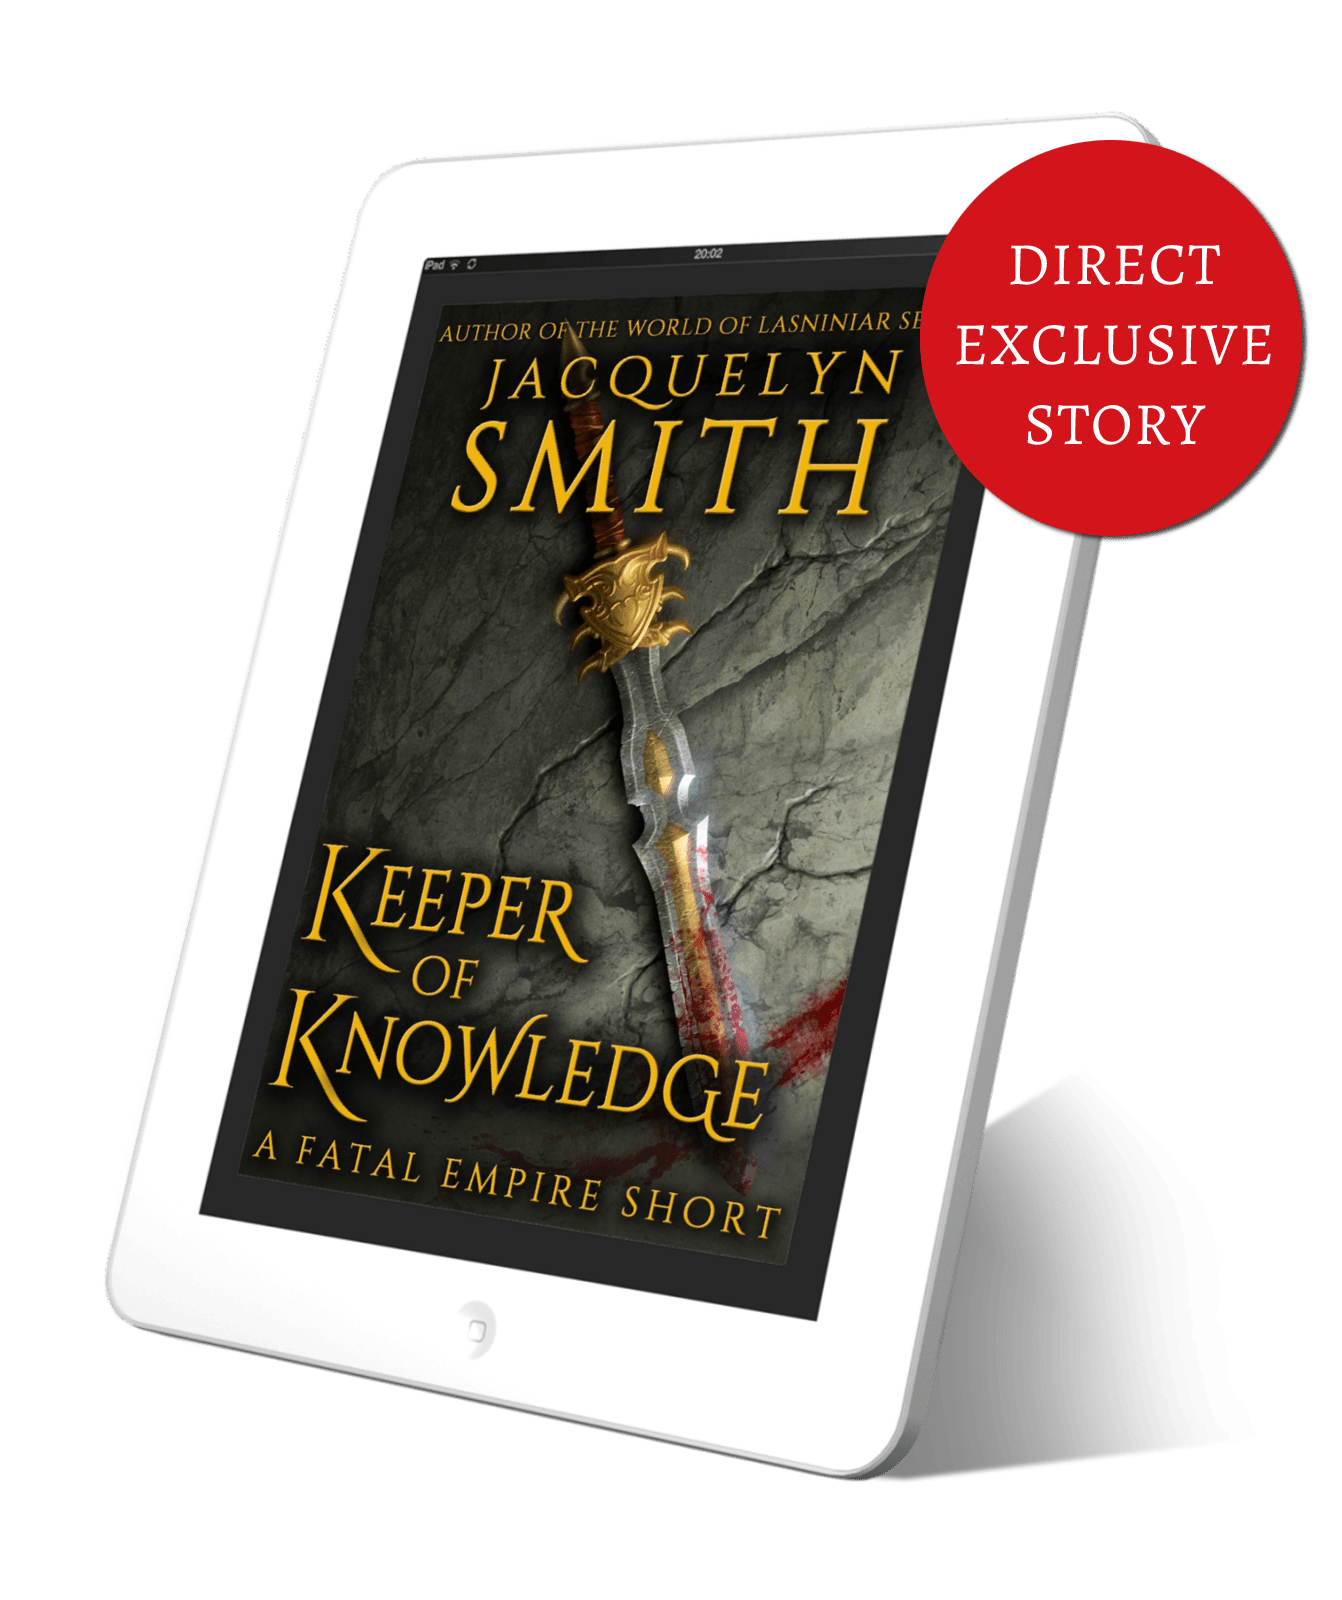 Keeper of Knowledge: A Fatal Empire Short (Direct Exclusive) - Jacquelyn Smith Books